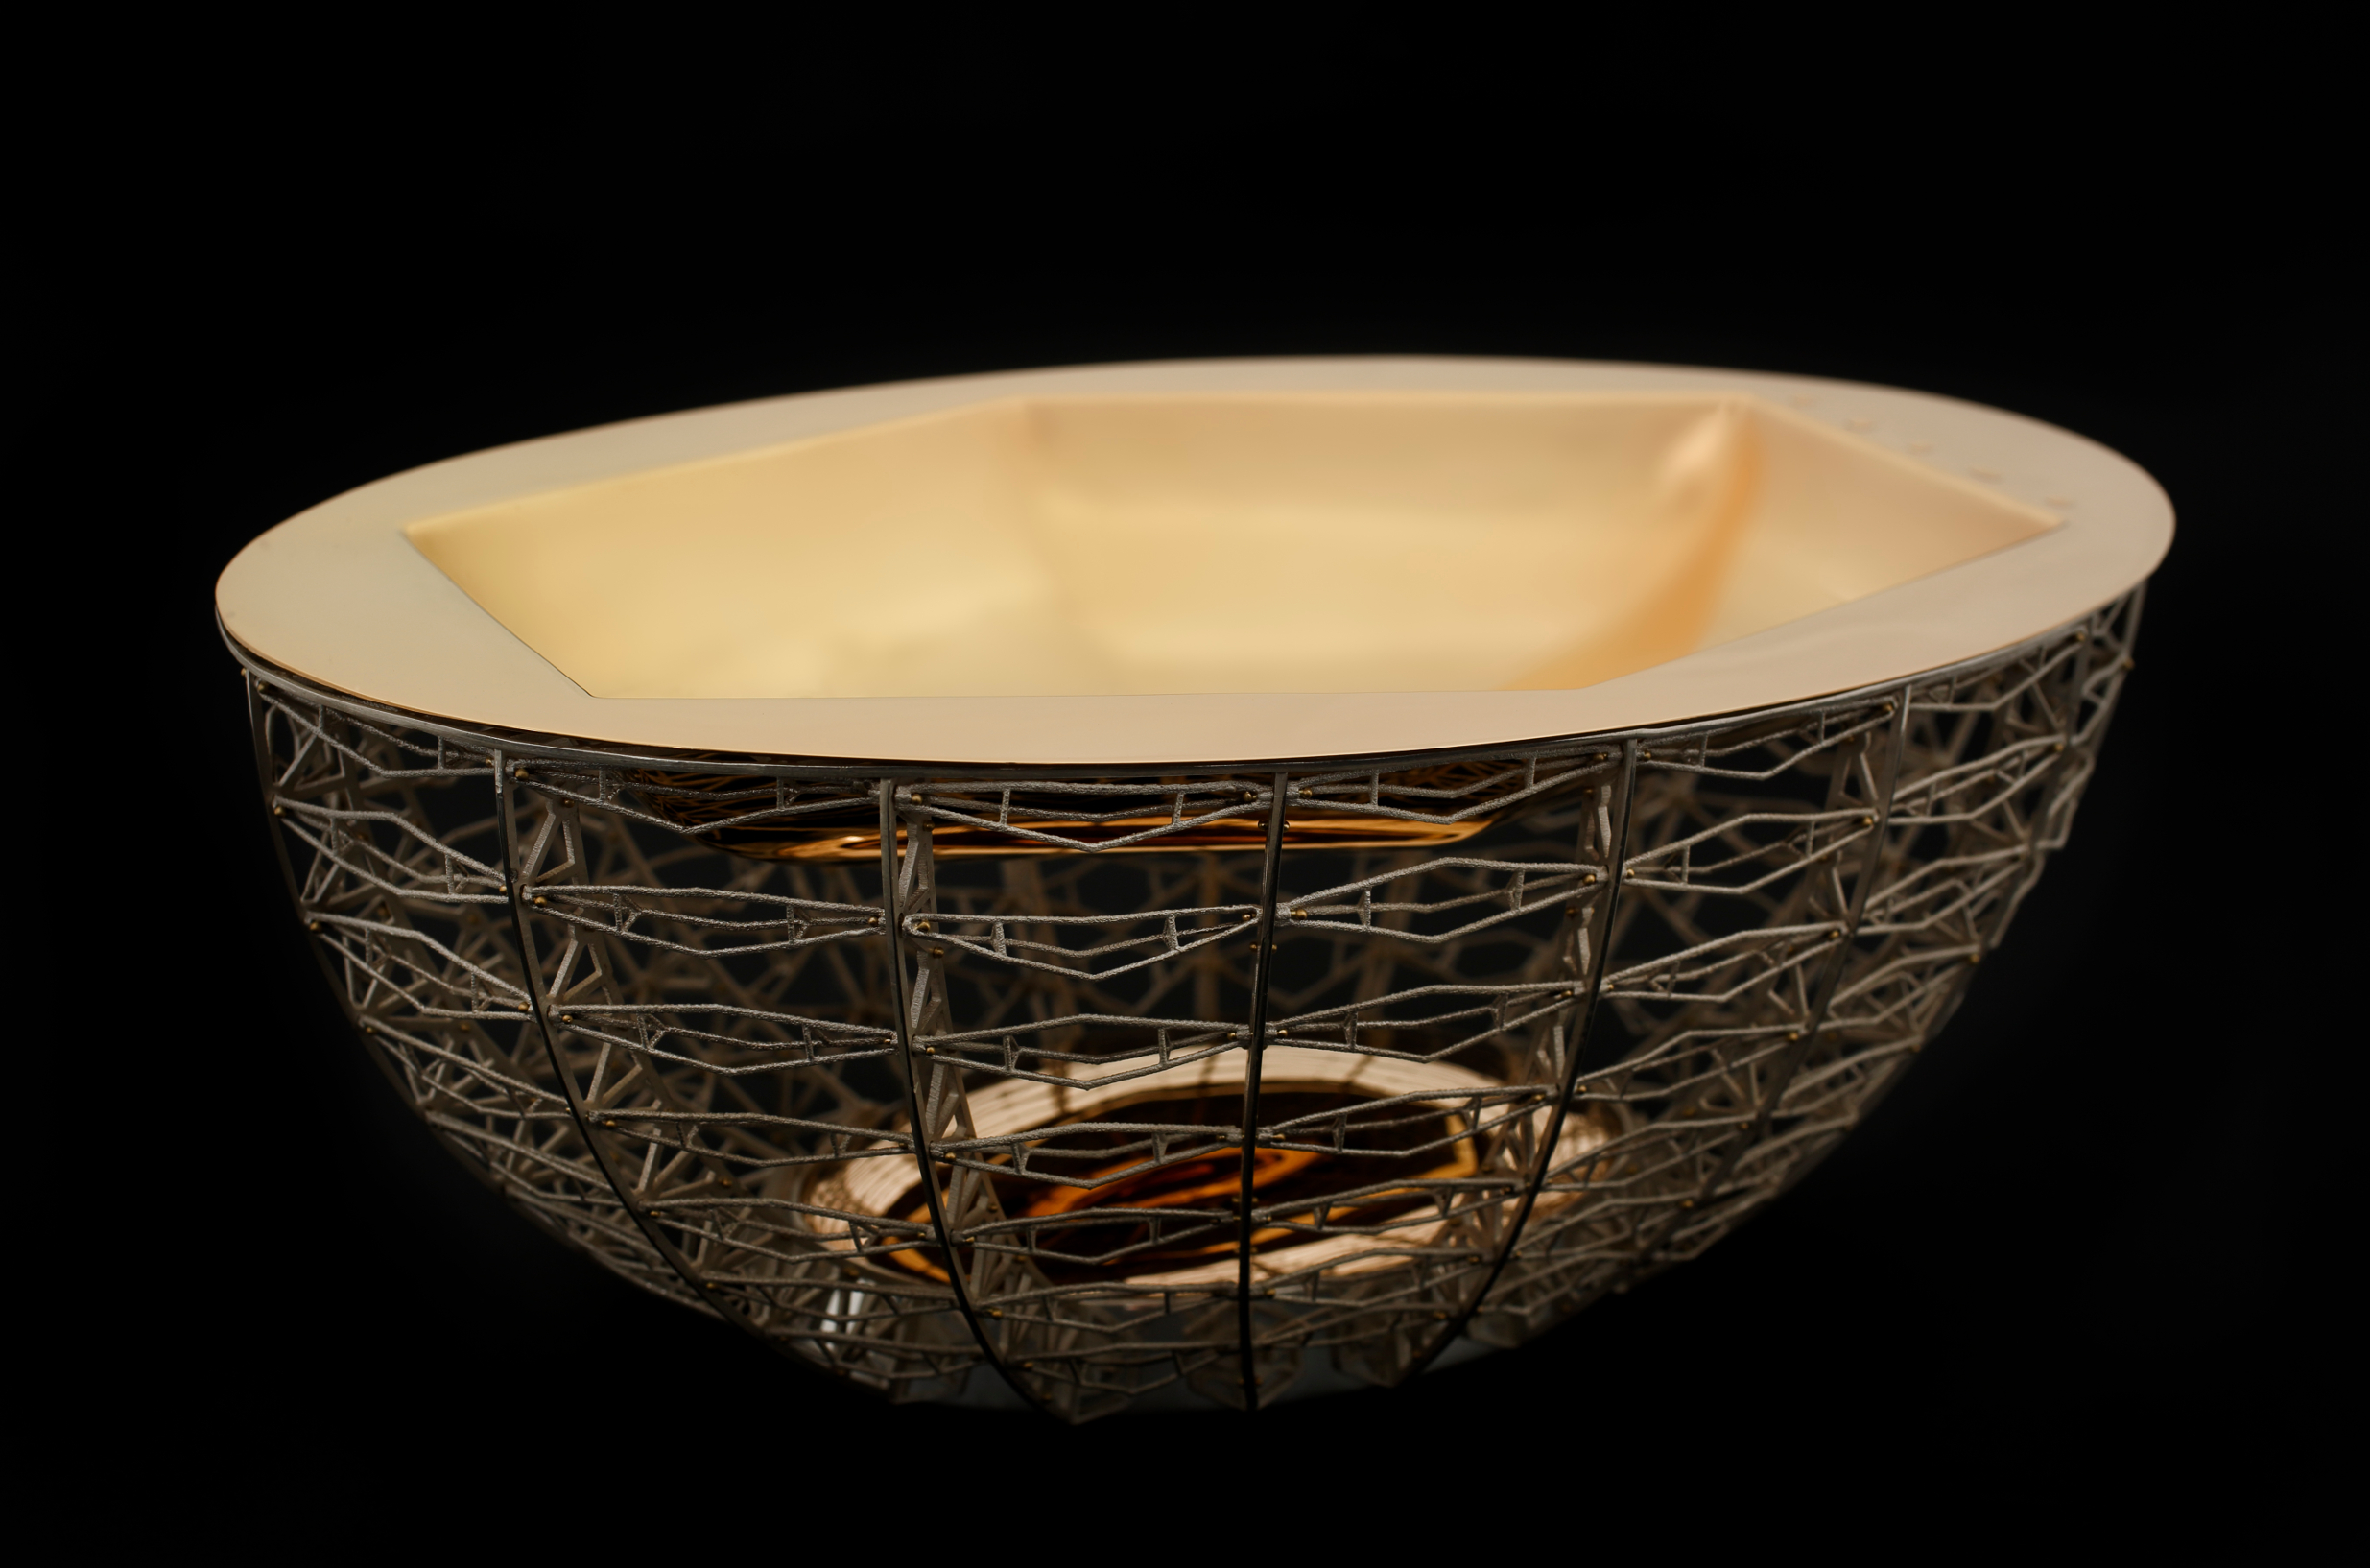 Infinity Oval Bowl